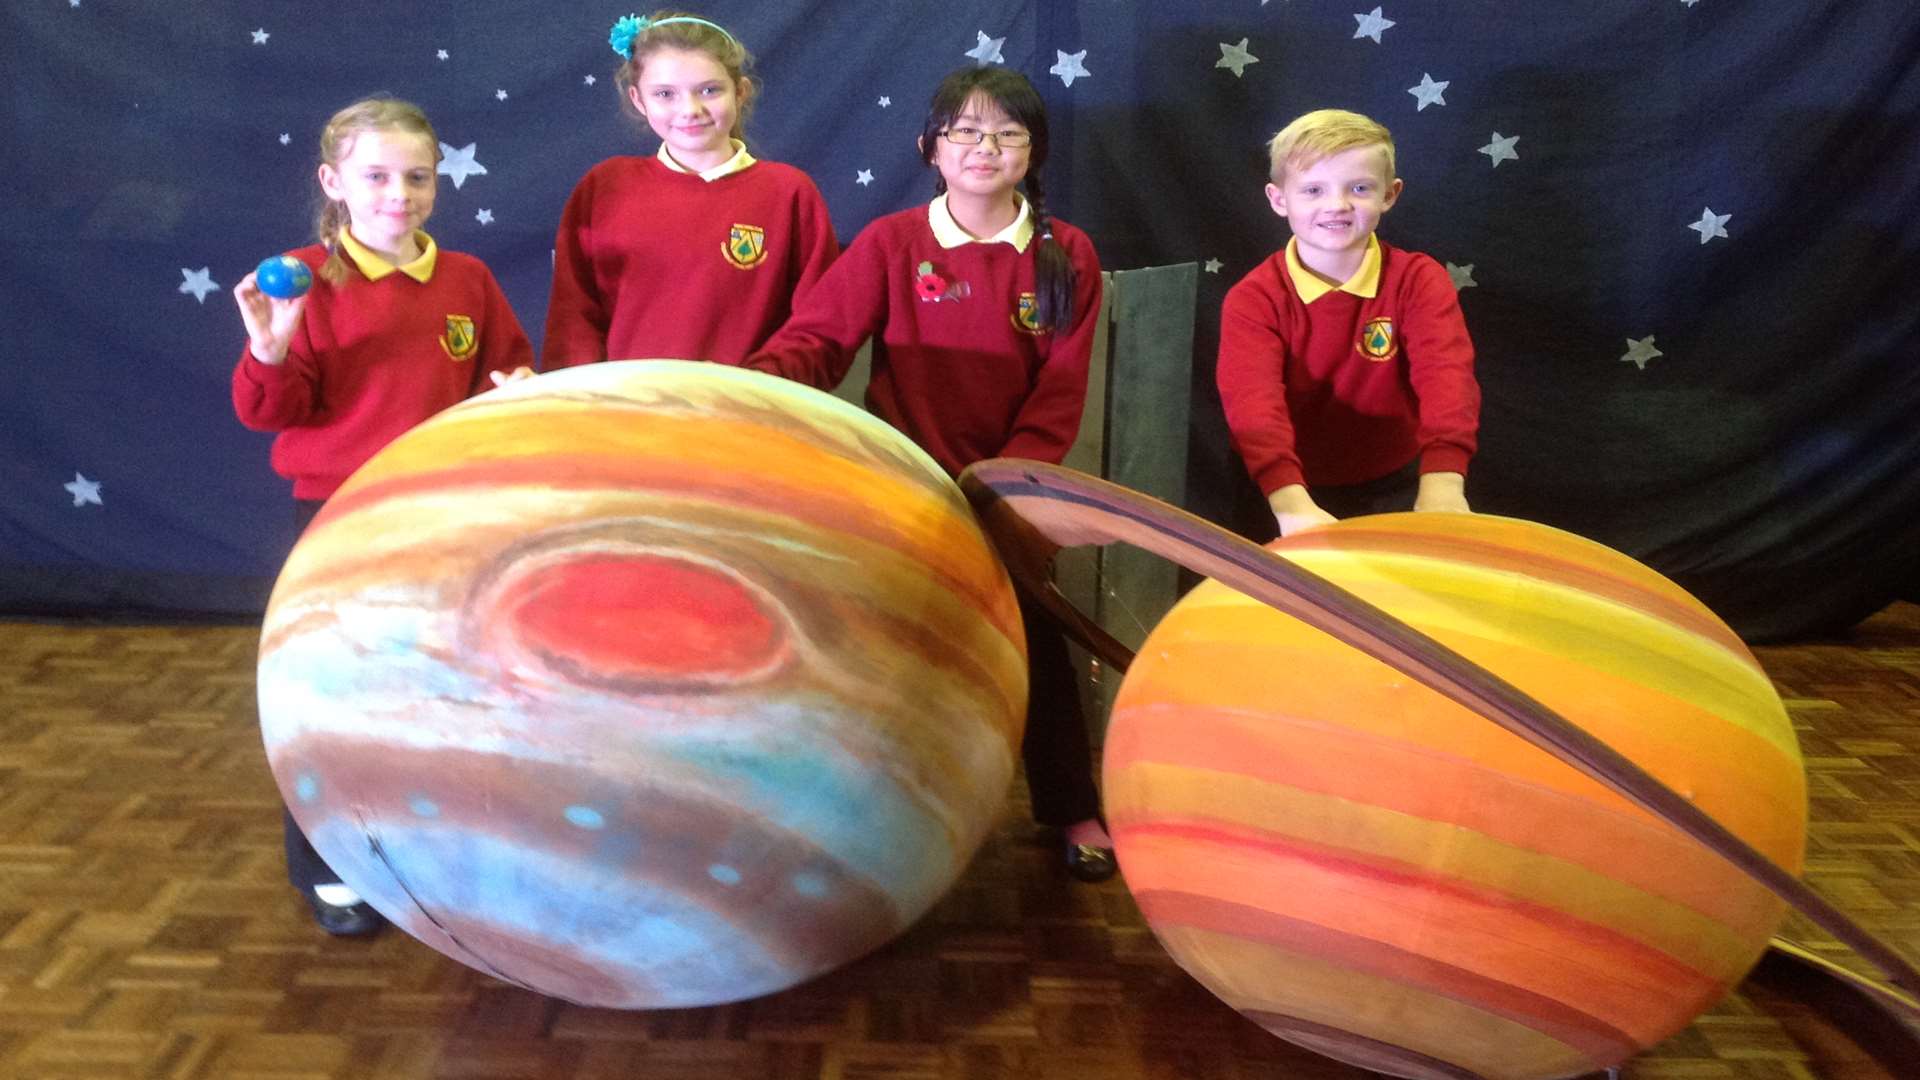 Pupils learning about the planets